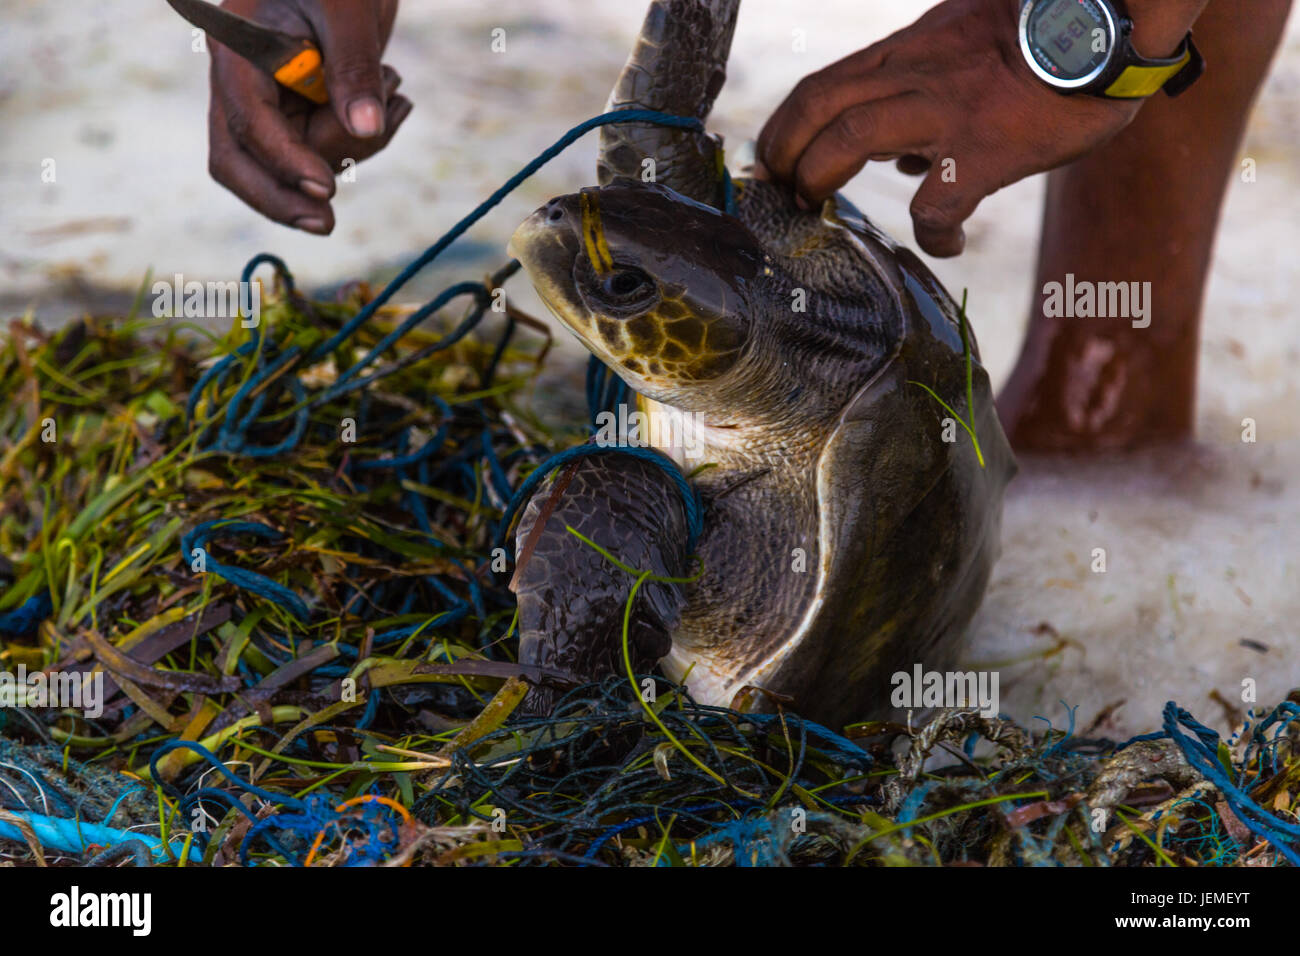 Sea turtle shell washed up on beach with fishing net wrapped around it, man saves sea turtle from fishing net. Tropical country, saving marine life Stock Photo